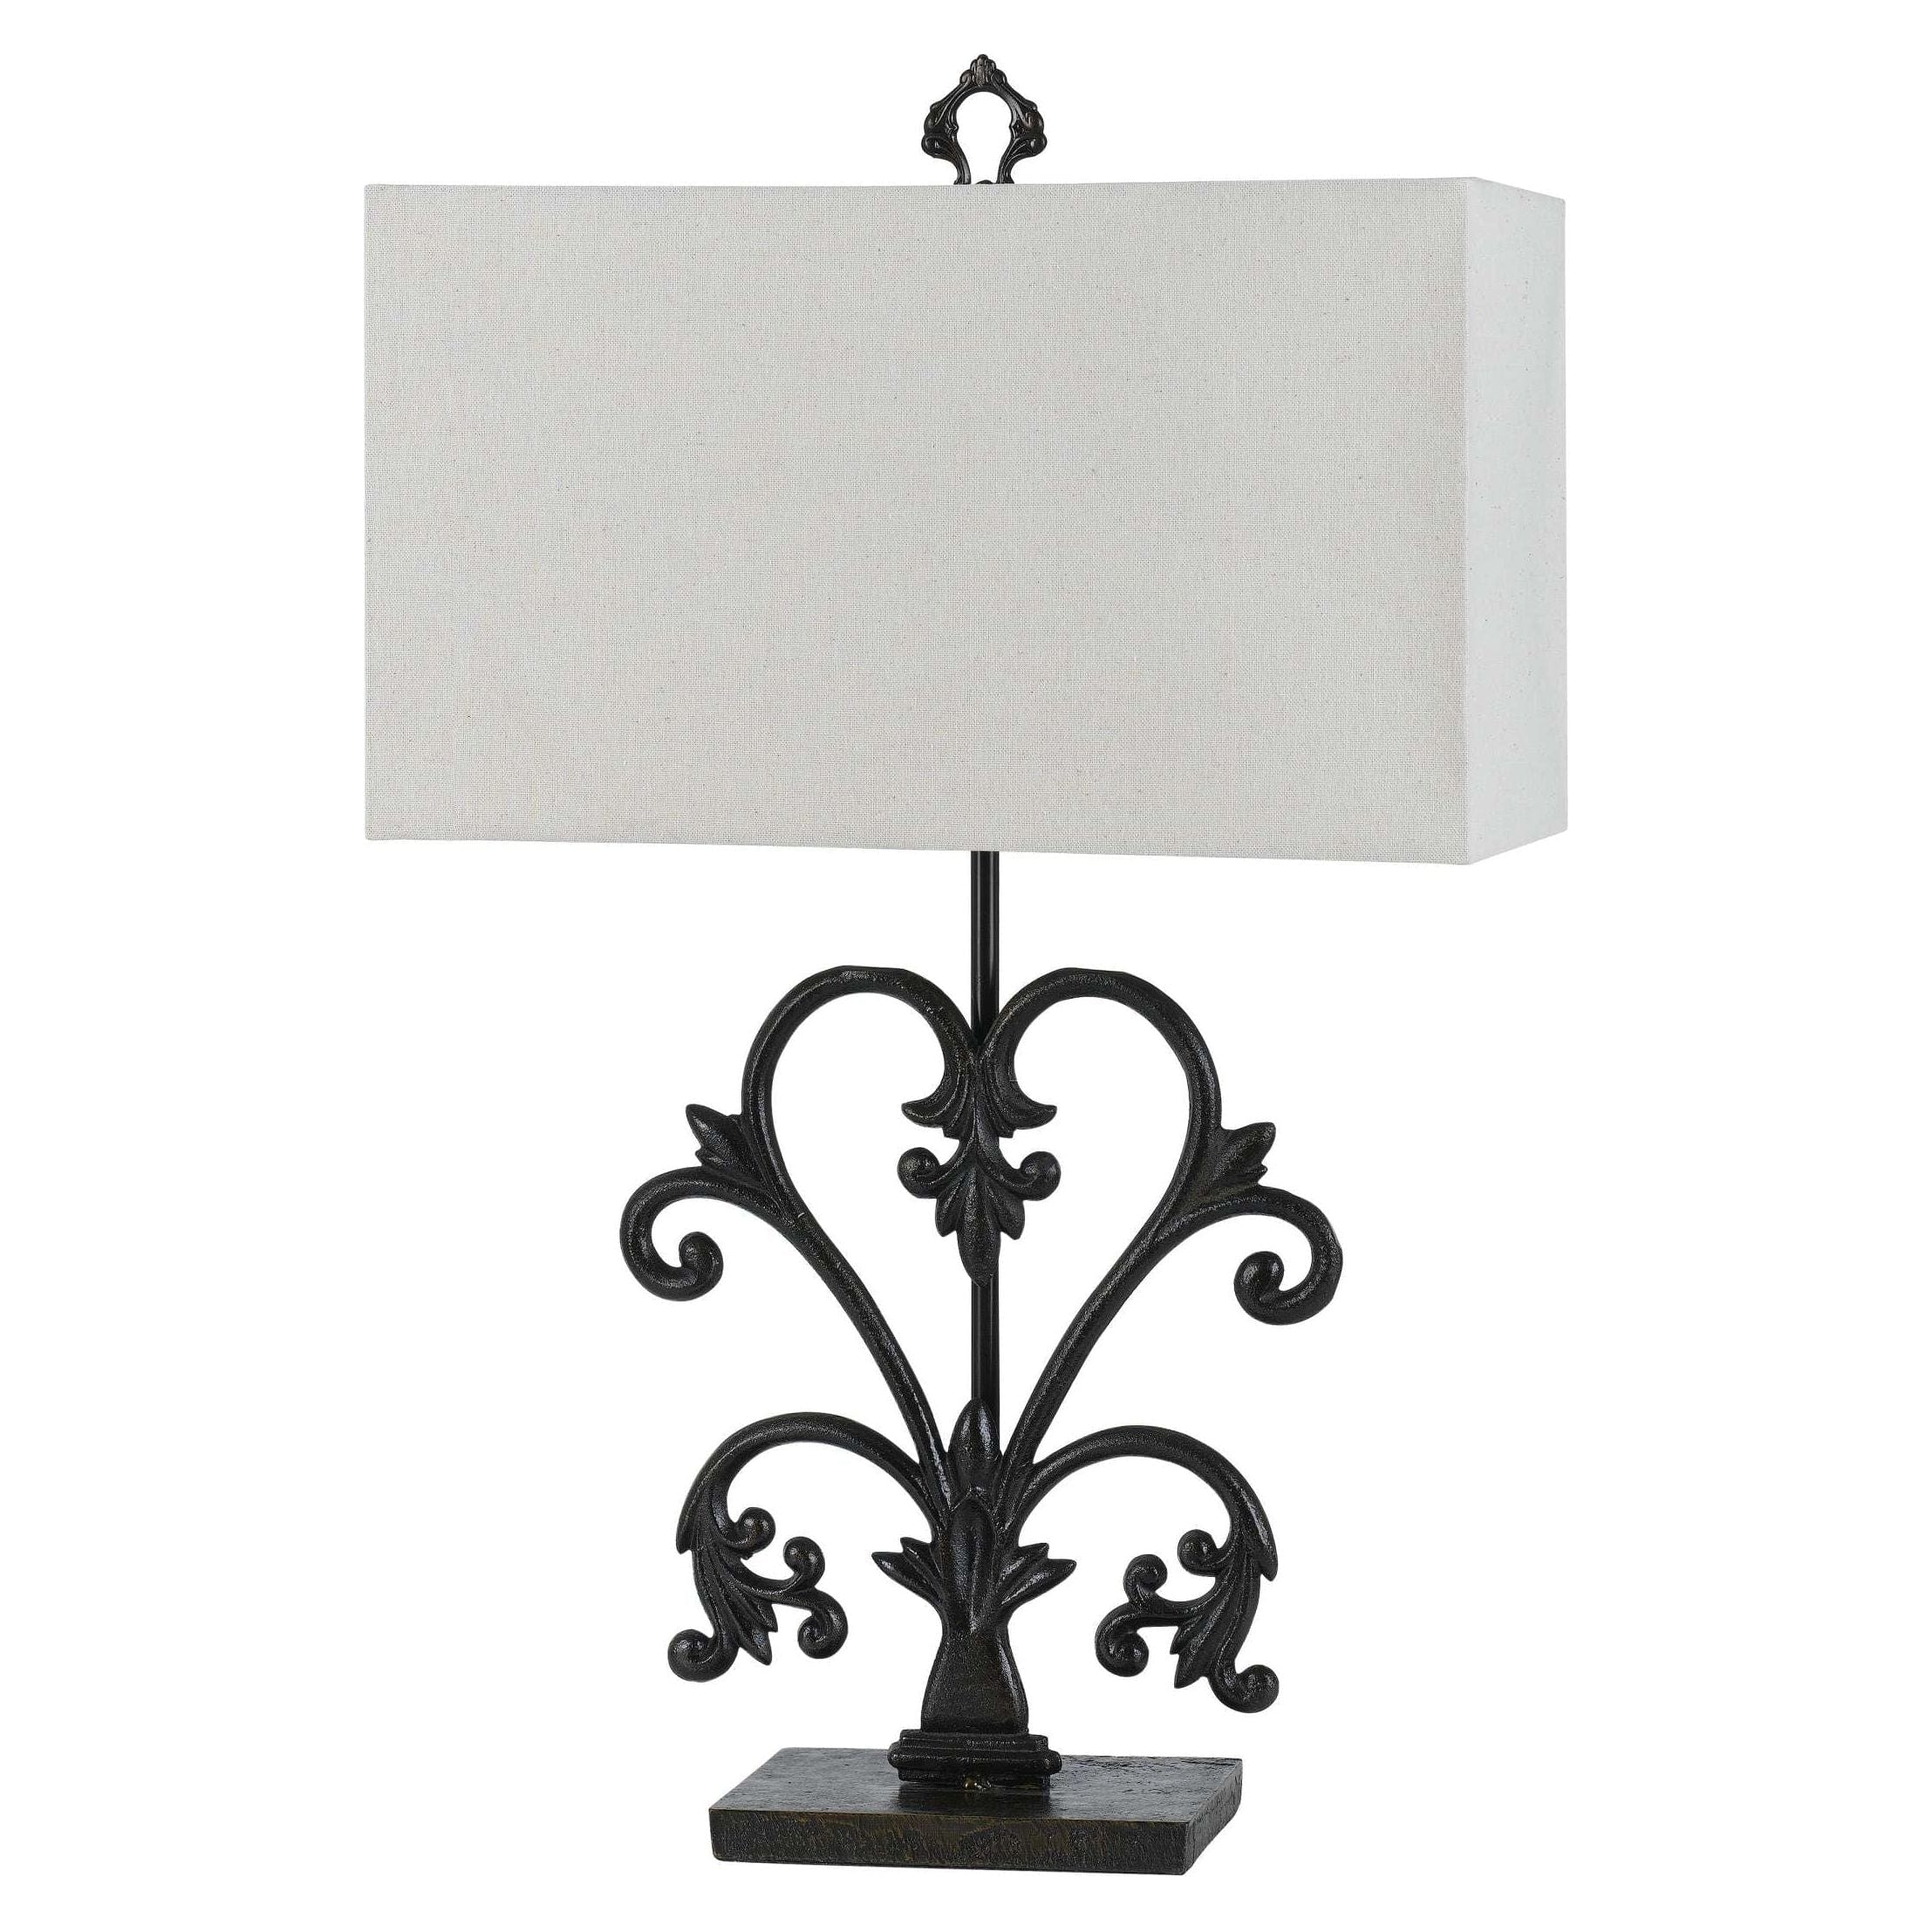 Benzara Rectangular Shade Table Lamp With Scrolled Metal Base, Off White And Black By Benzara Table Lamps BM224661